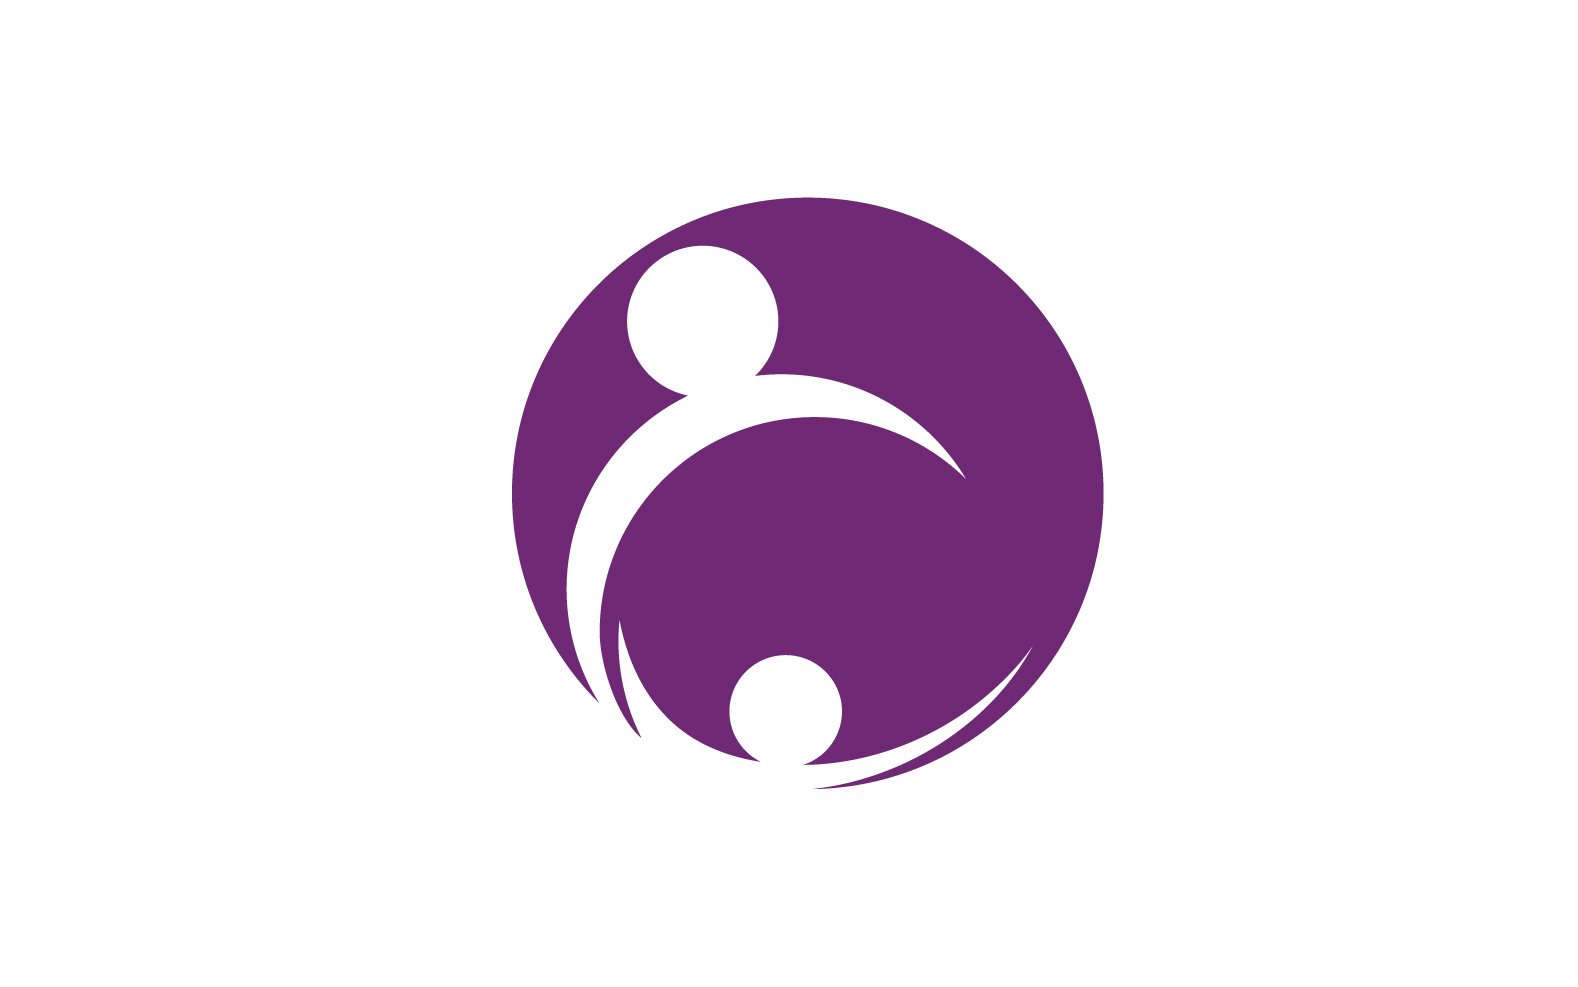 Community group and family care or adoption logo vector v38